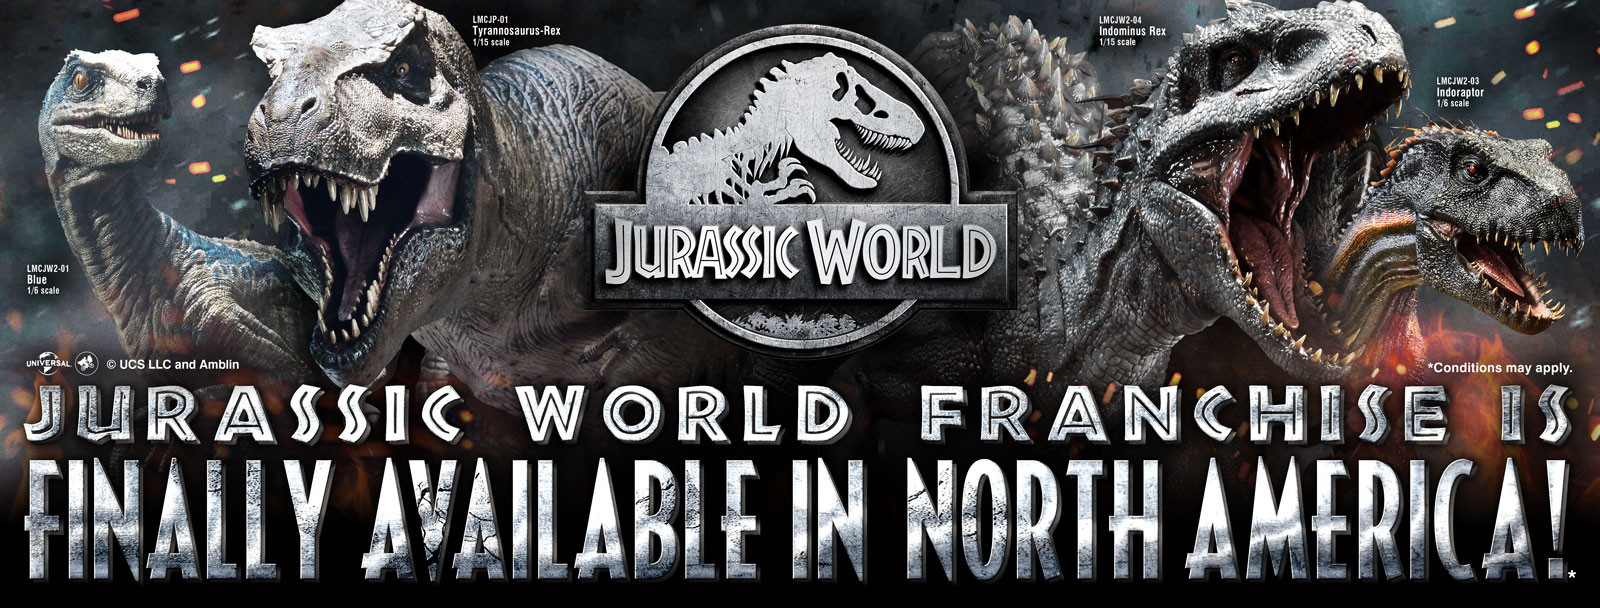 Jurassic World Franchise is finally available in North America!